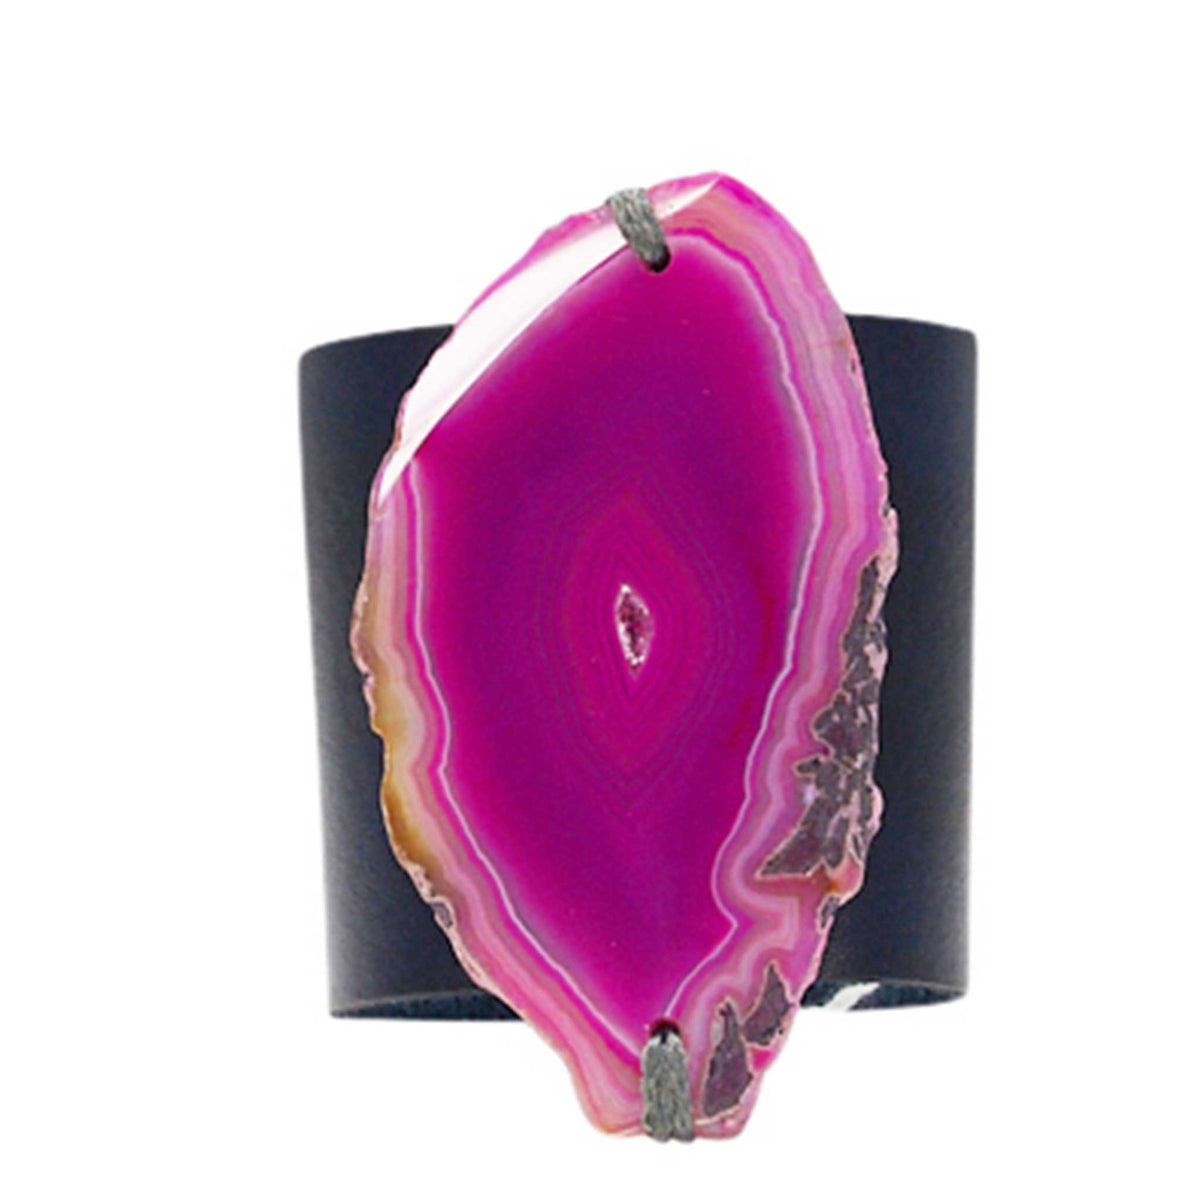 HANDCRAFTED CUFF - NAVY BLUE LEATHER PINK AGATE - NAPI1.2